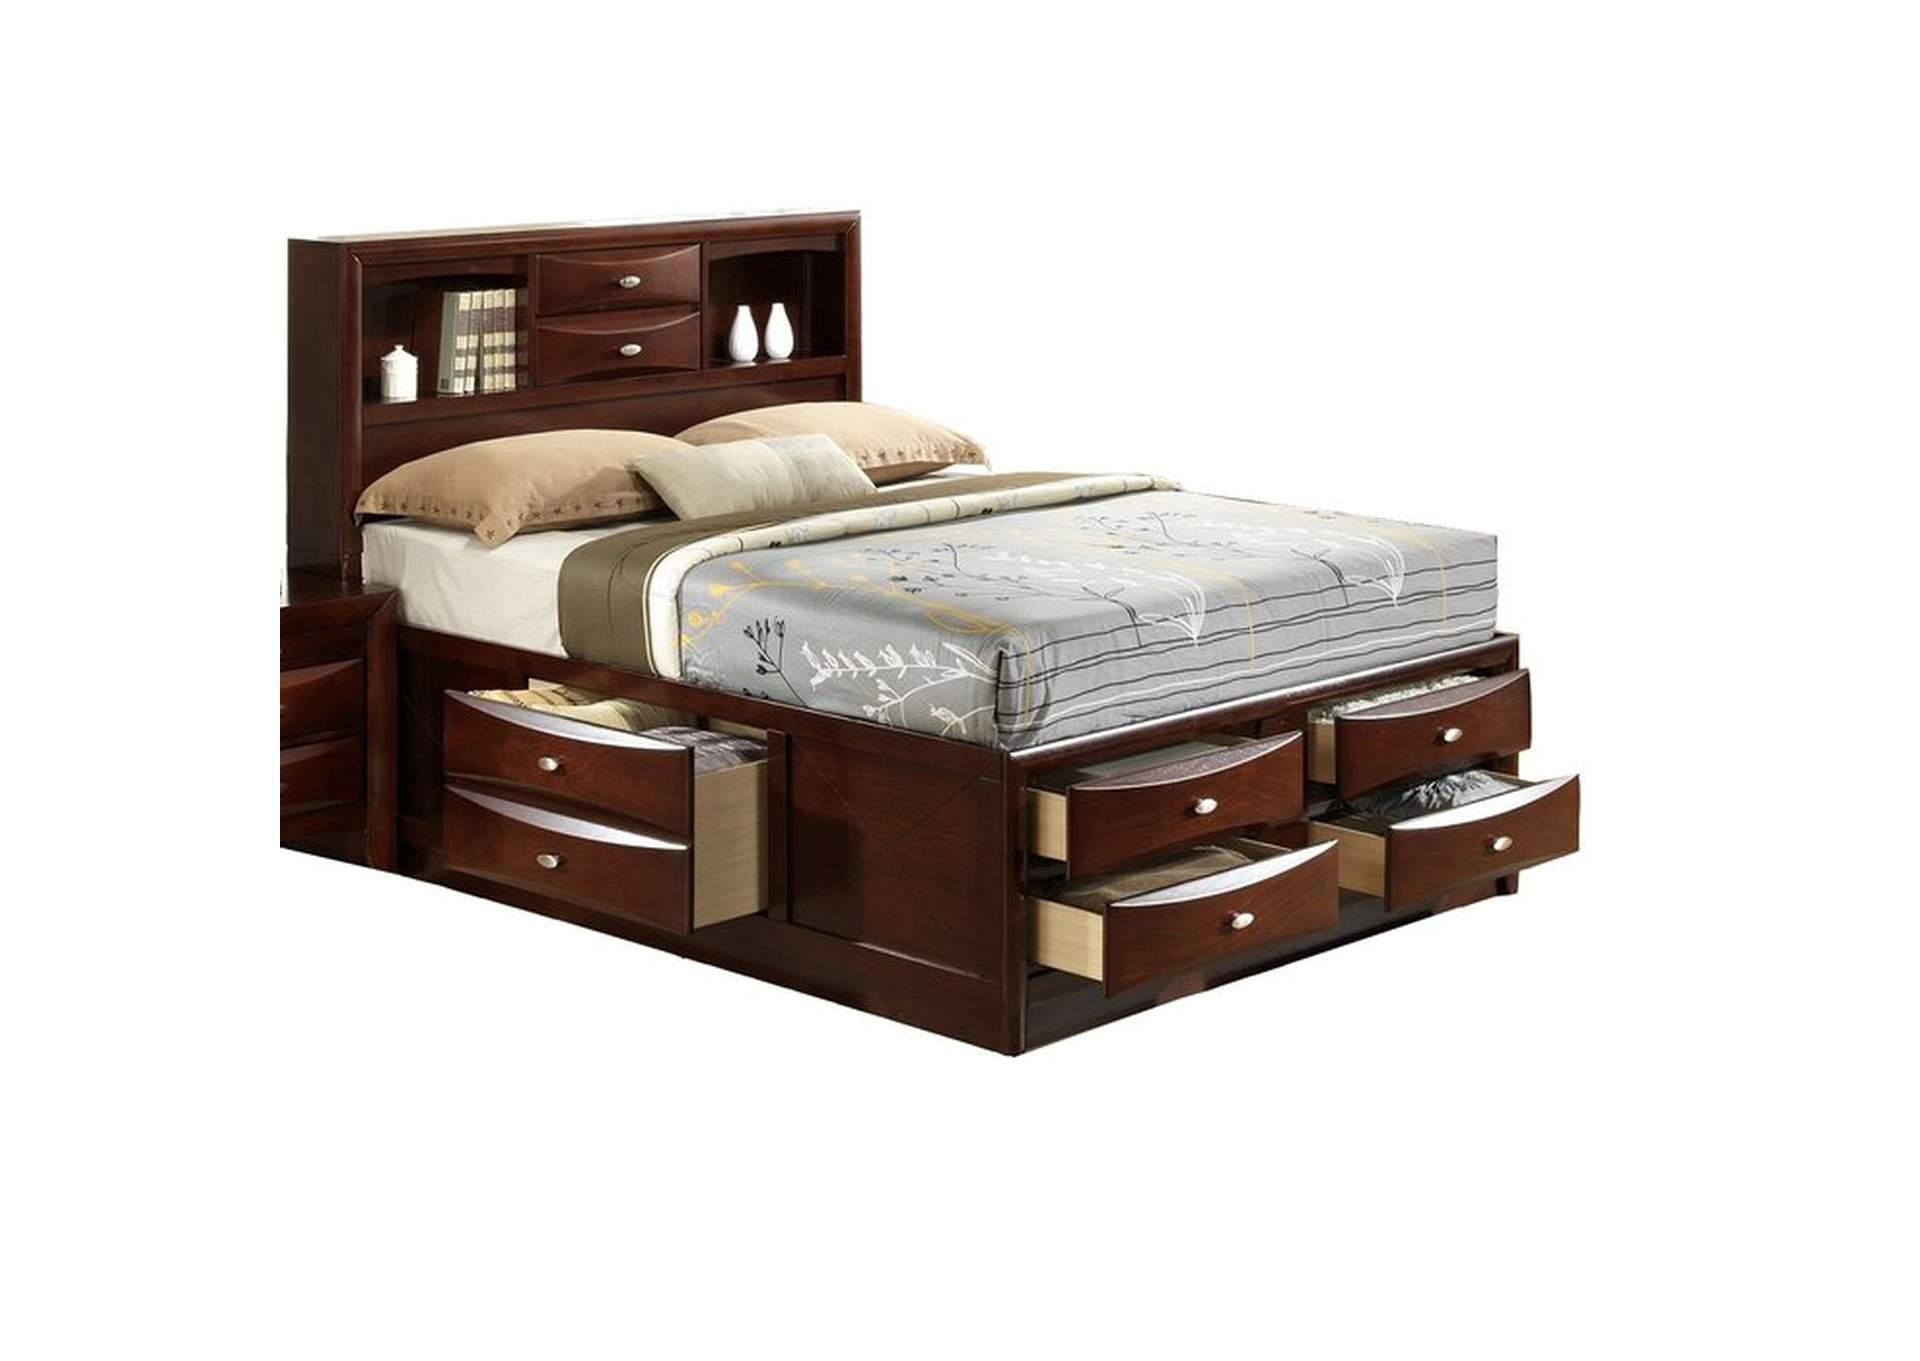 Contemporary, Modern Storage Bed EMILY GHF-808857825803 in Cherry 